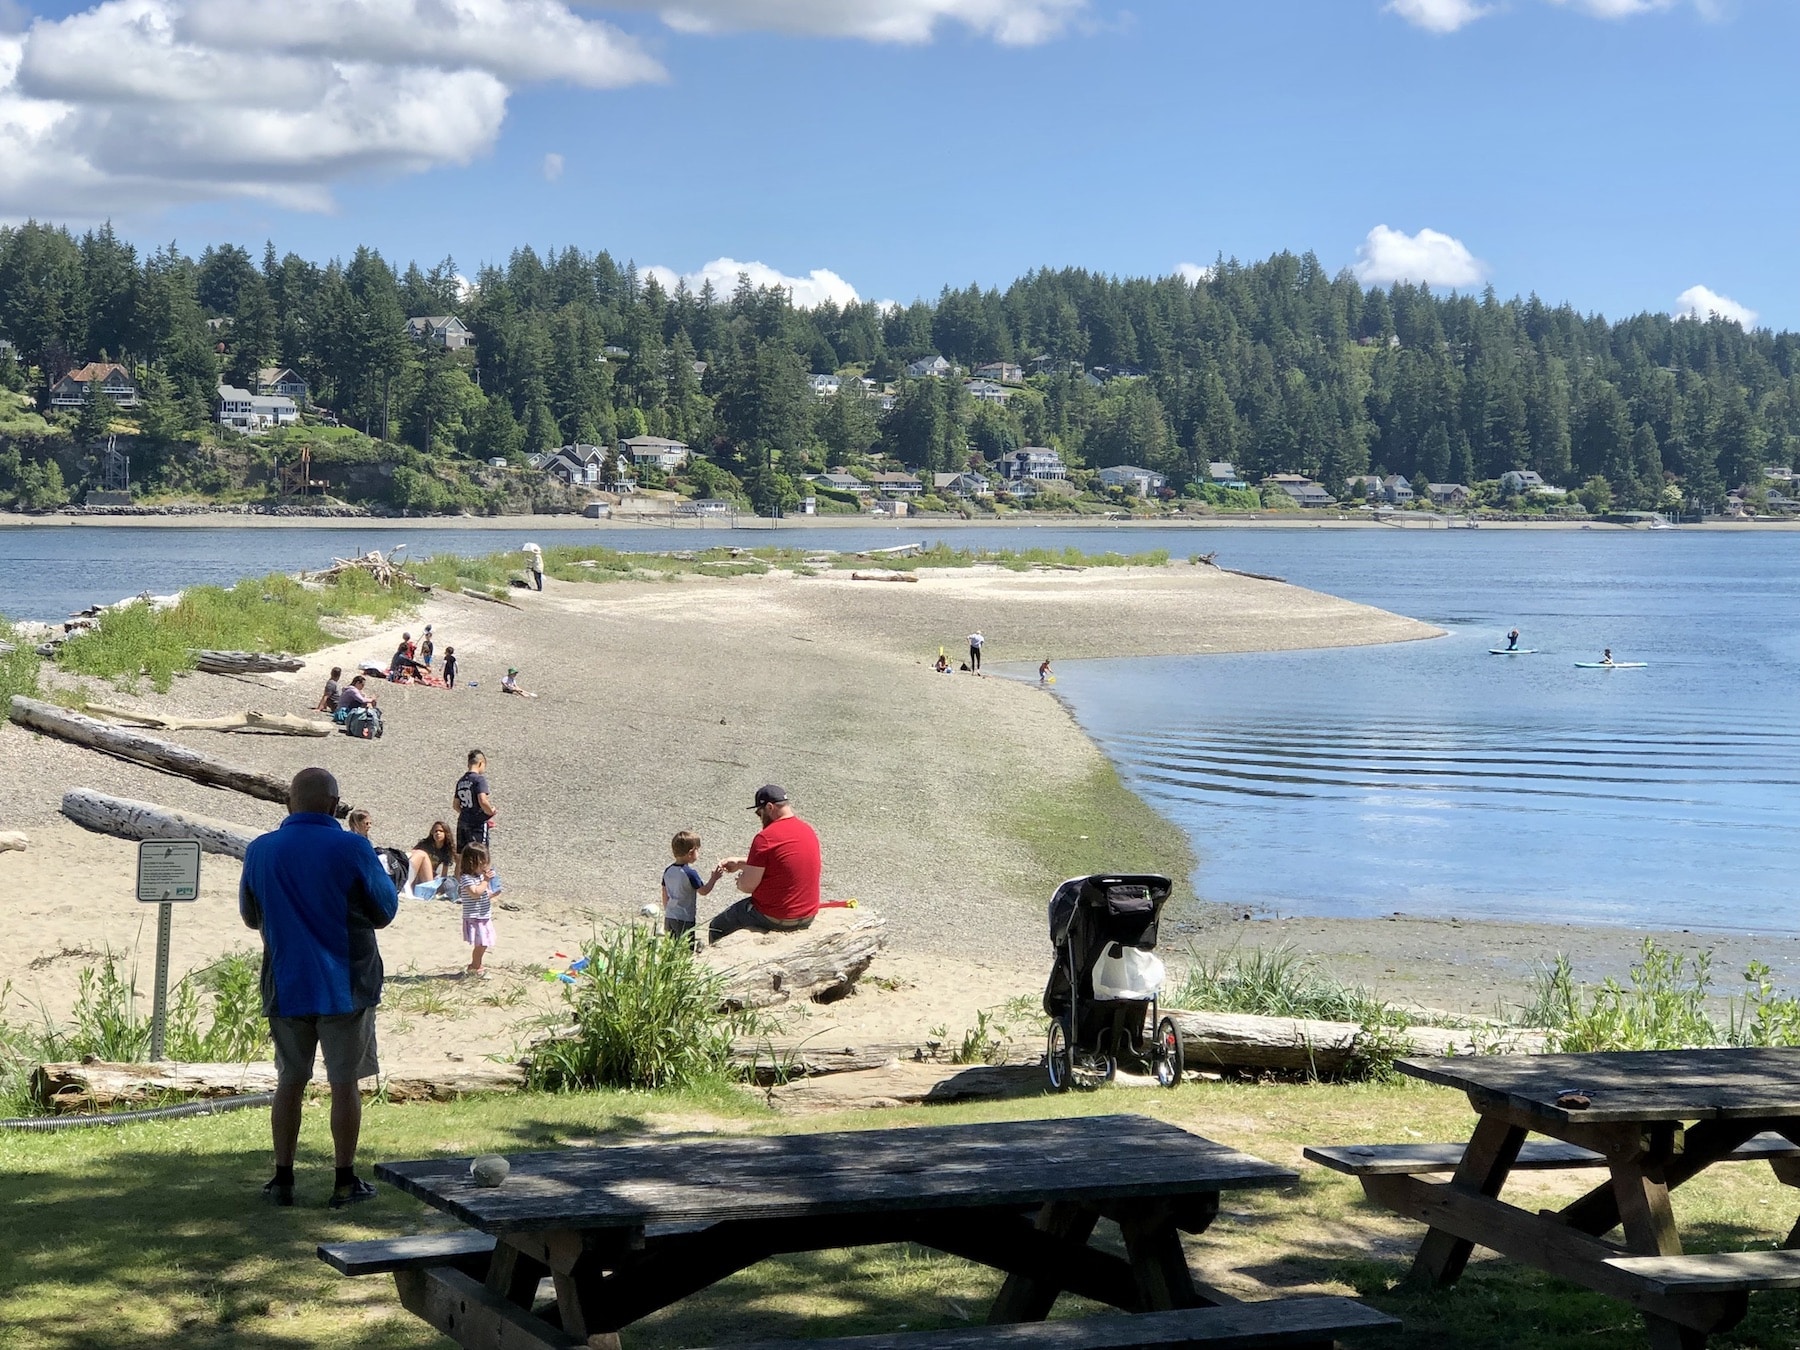 A rare summery day drew people to the Tacoma DeMolay Sandspit Nature Preserve Thursday.